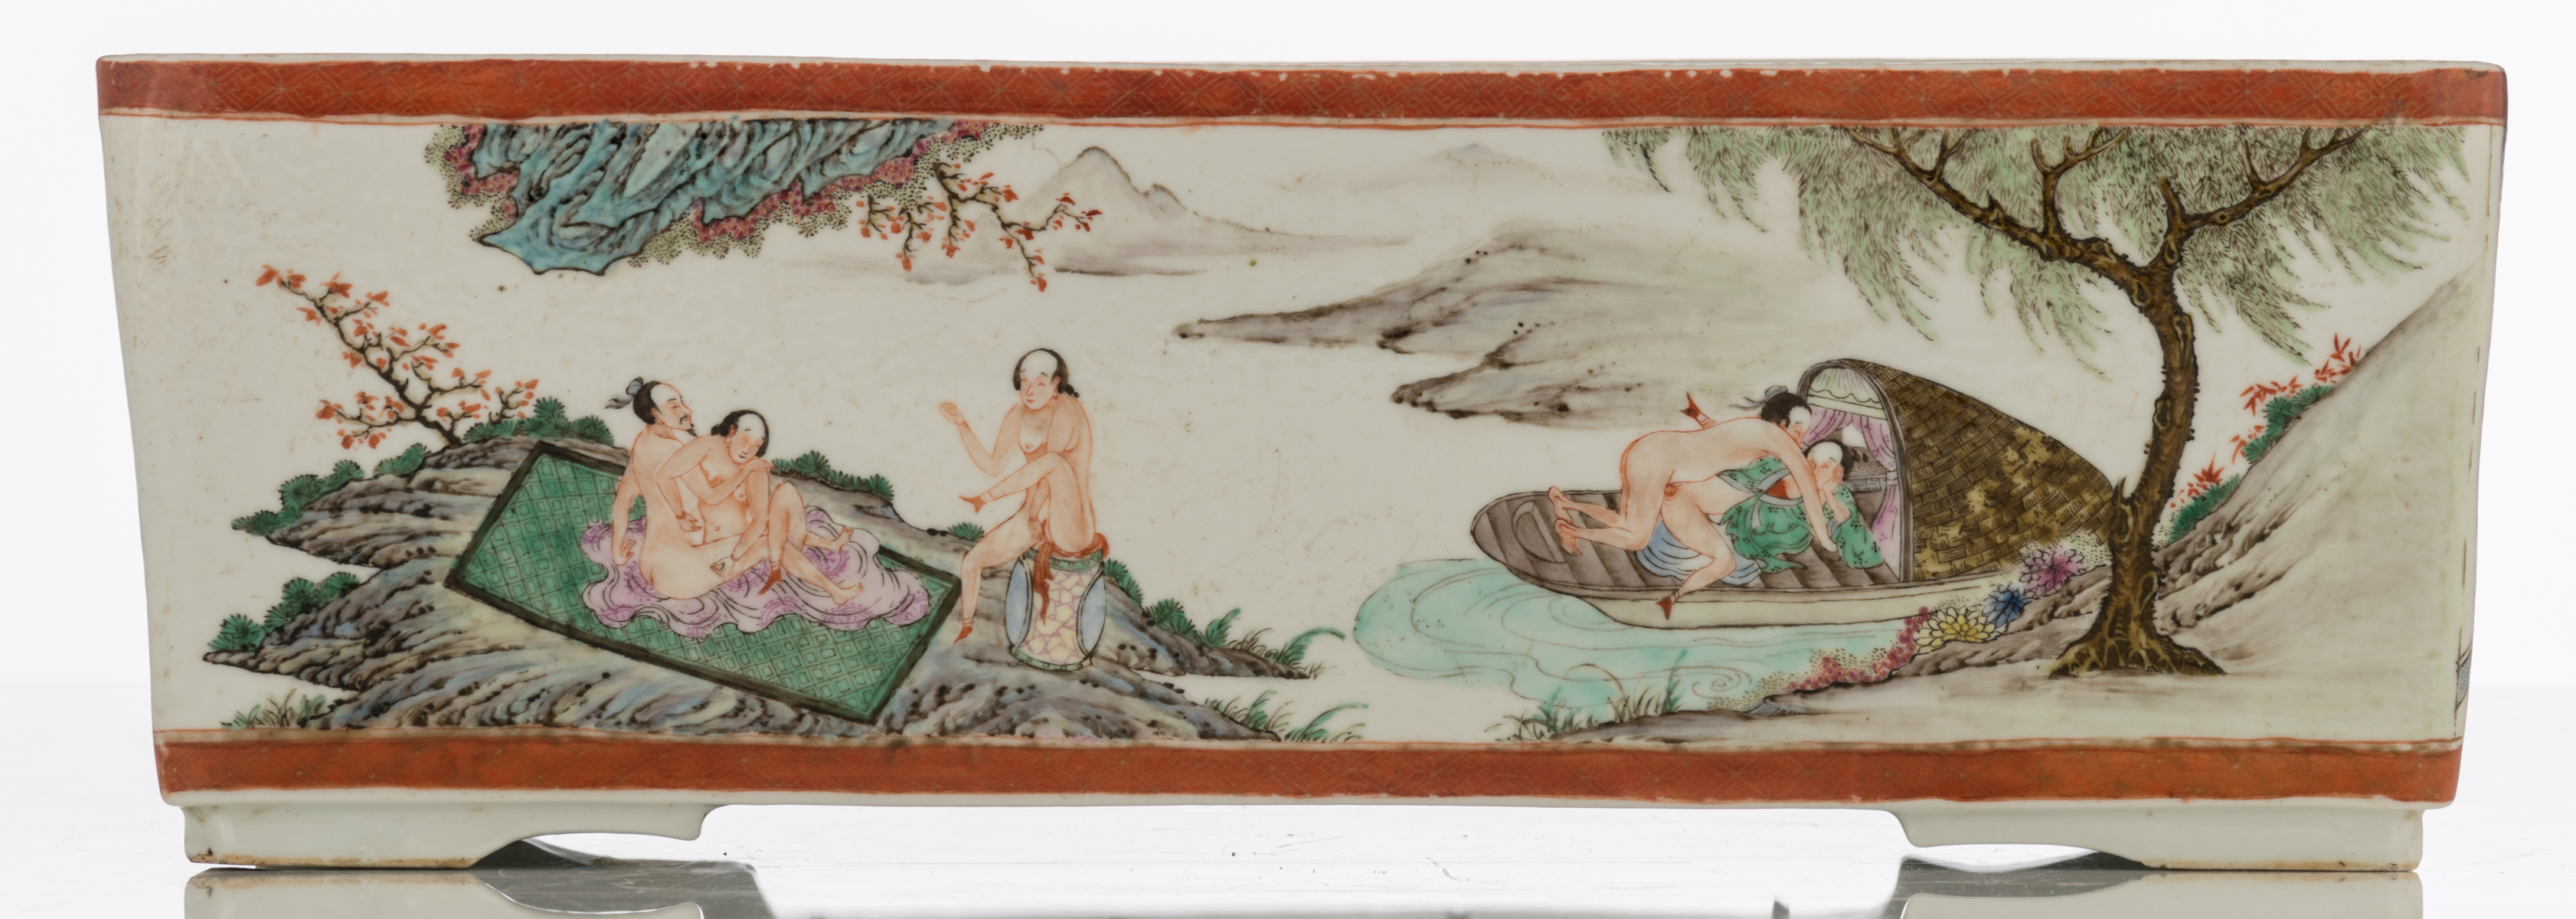 A Chinese famille rose and polychrome decorated rectangular cachepot with erotic scenes, marked, - Image 4 of 8